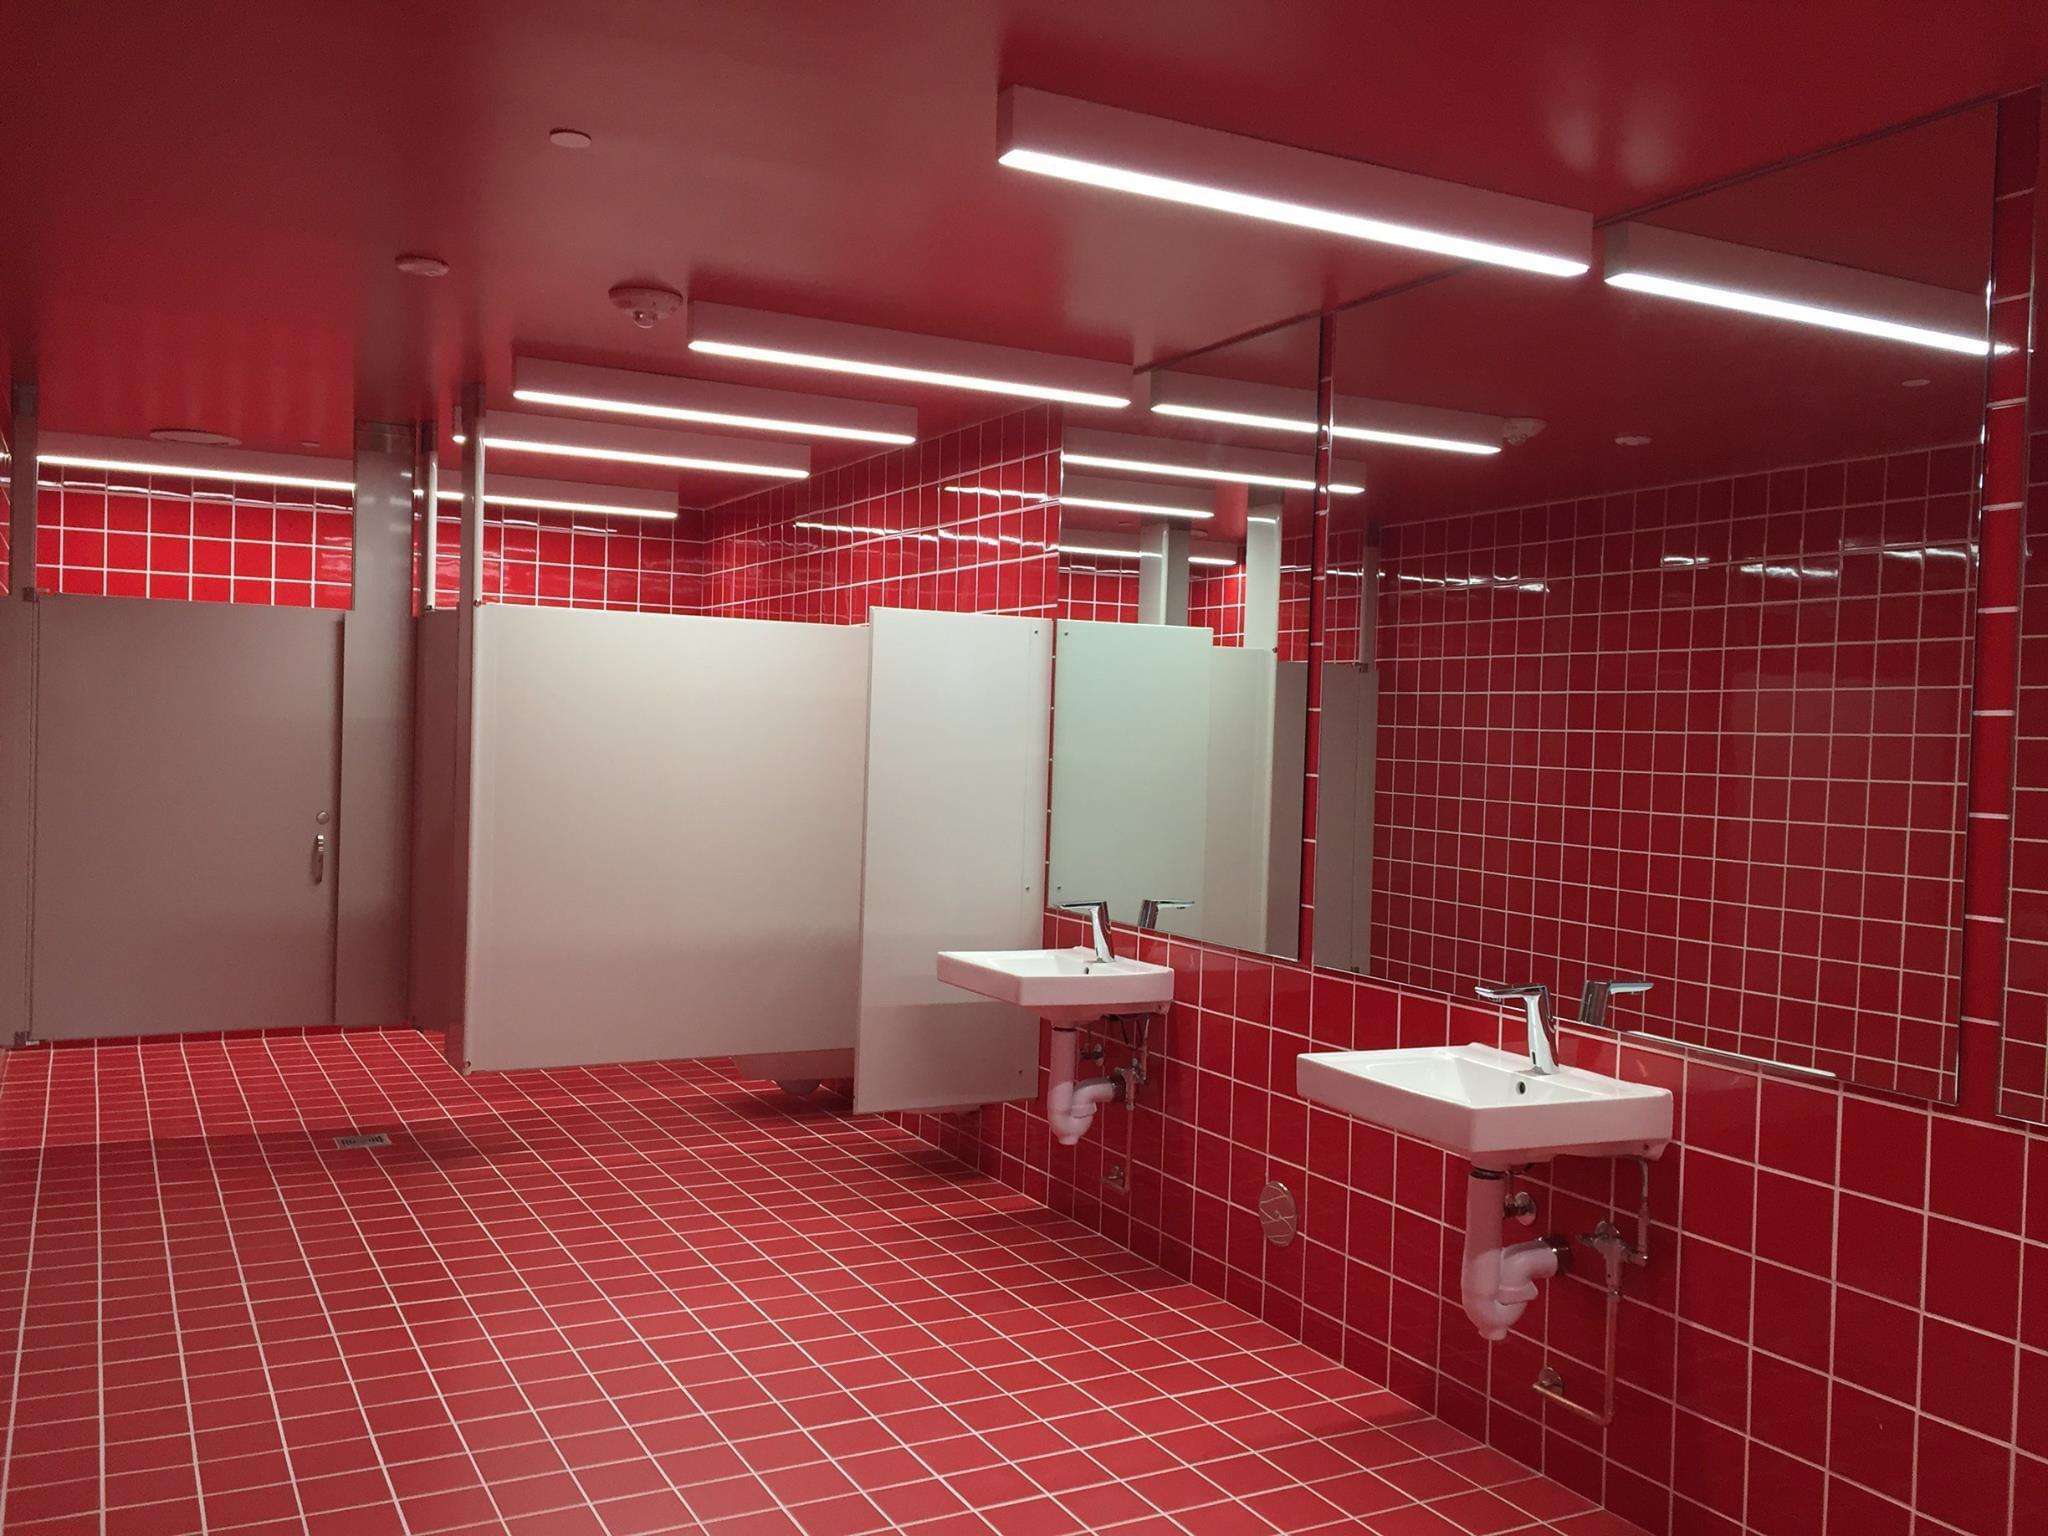 image showing [OC] A Red Restroom